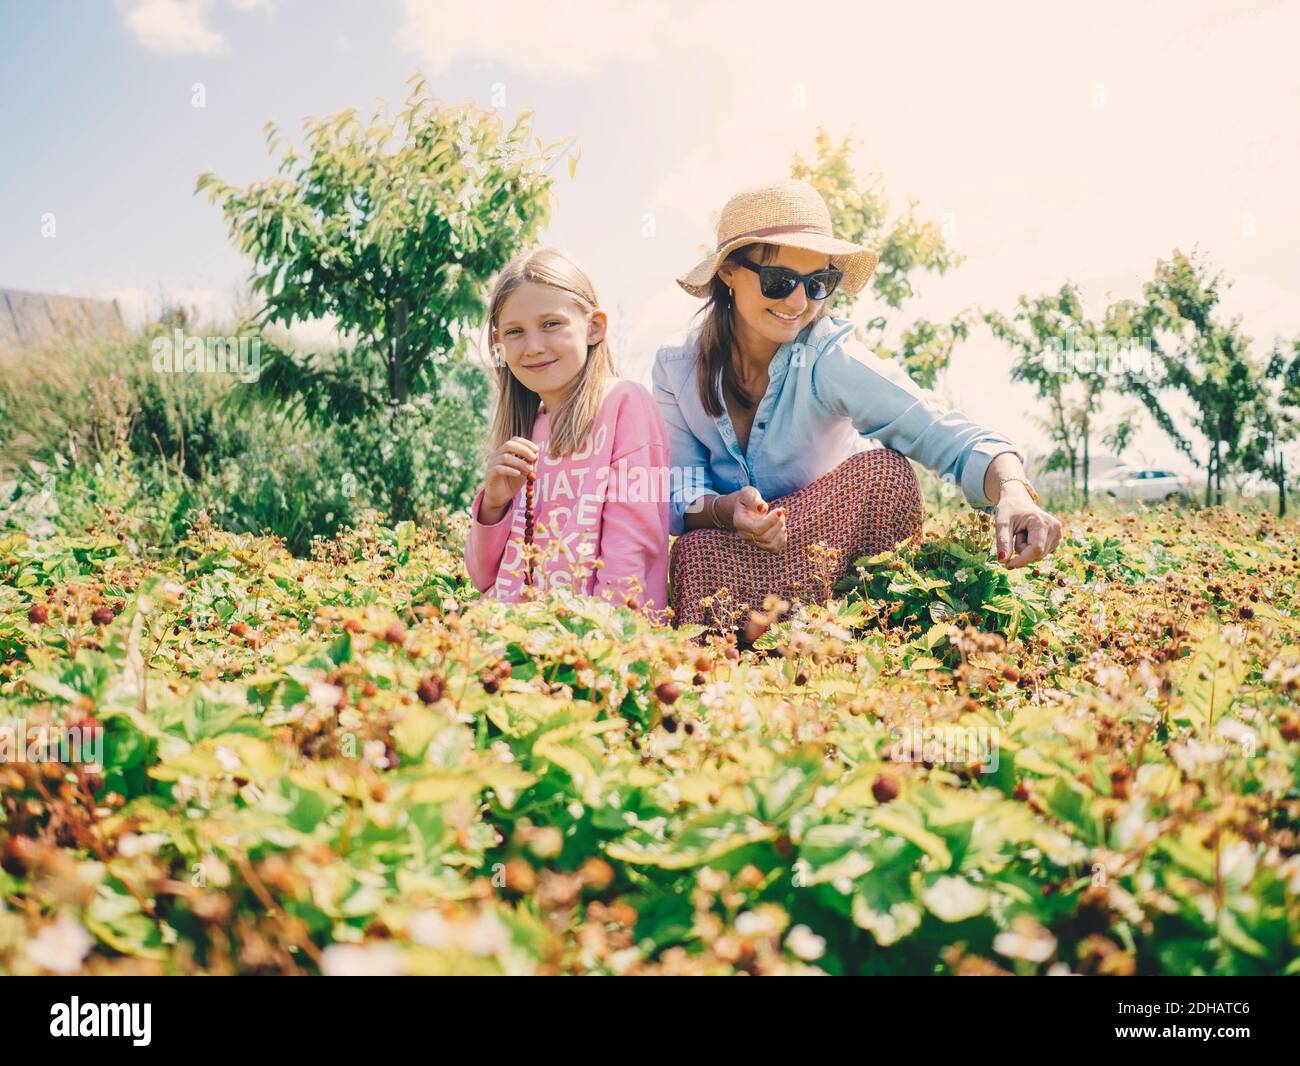 Smiling woman and daughter sitting amidst plants at farm against sky on sunny day Stock Photo